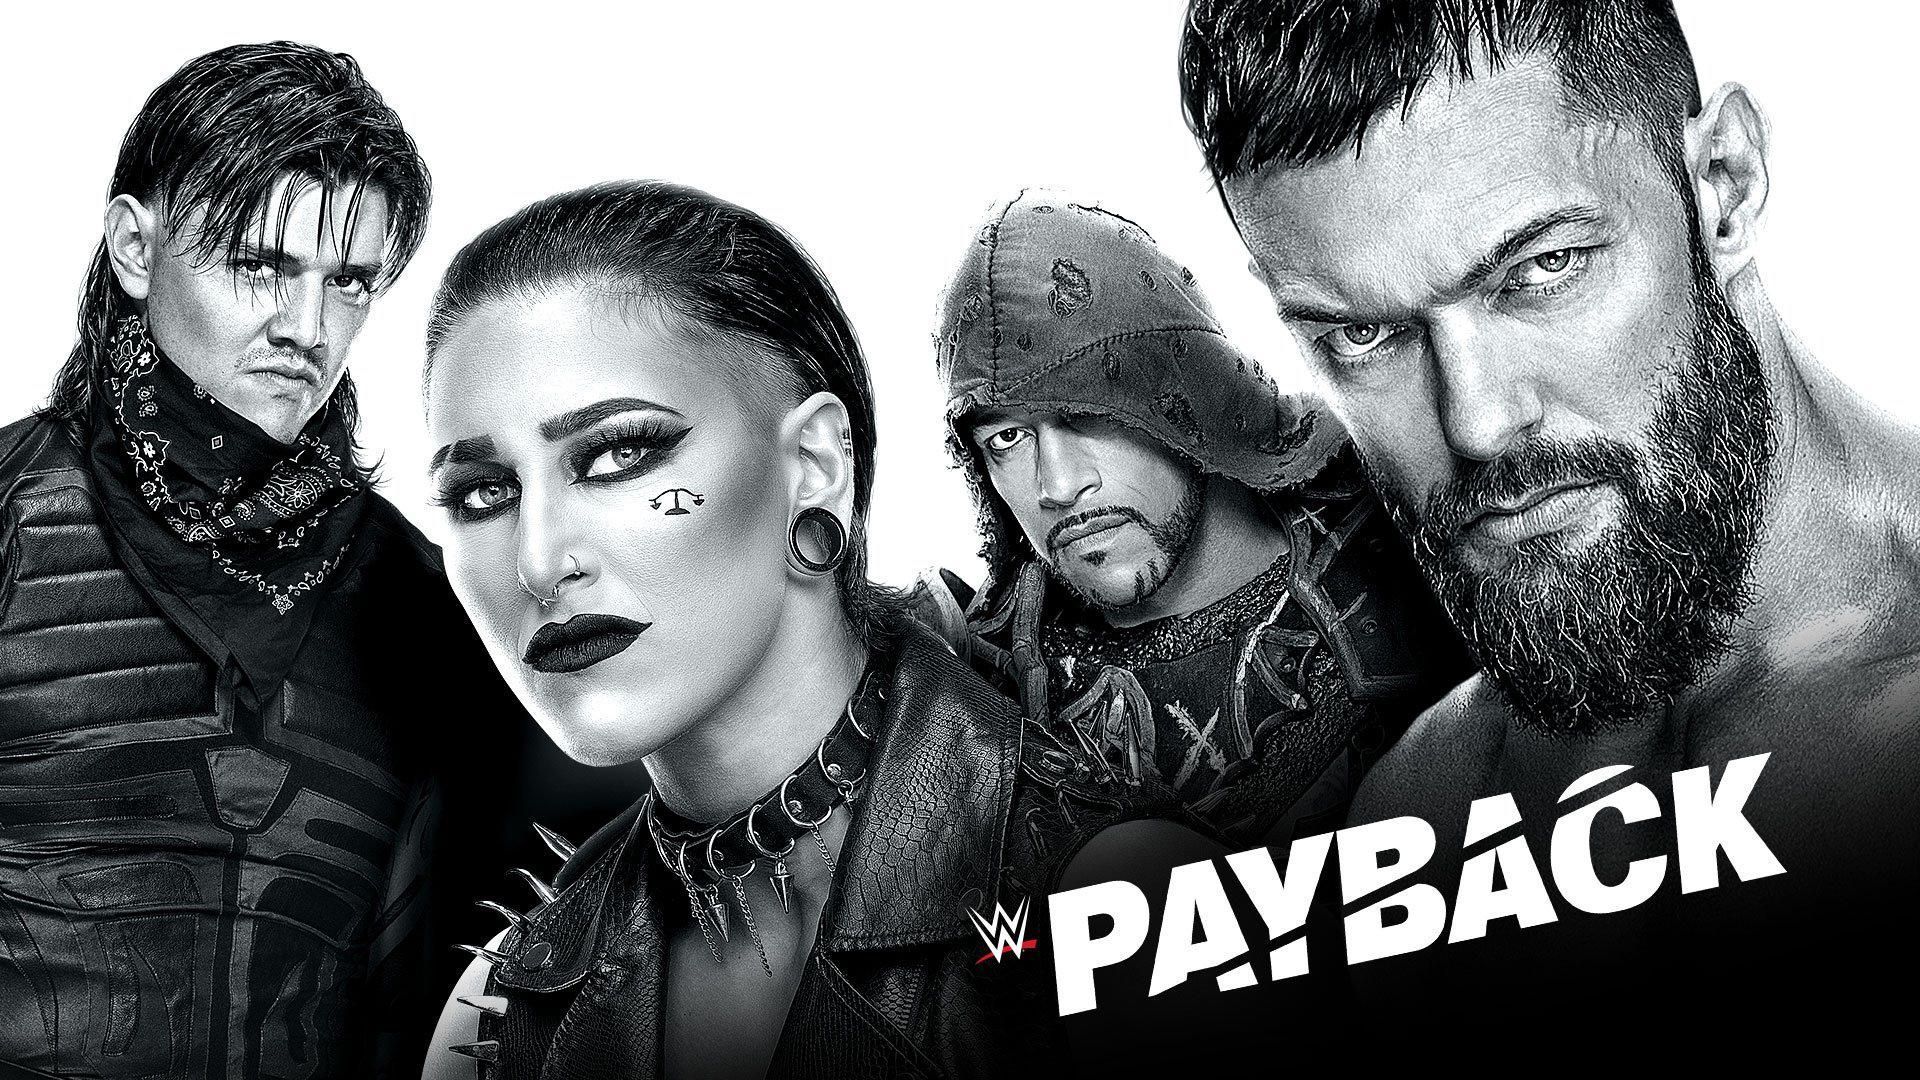 The Judgment Day is at the forefront of WWE Payback 2023.